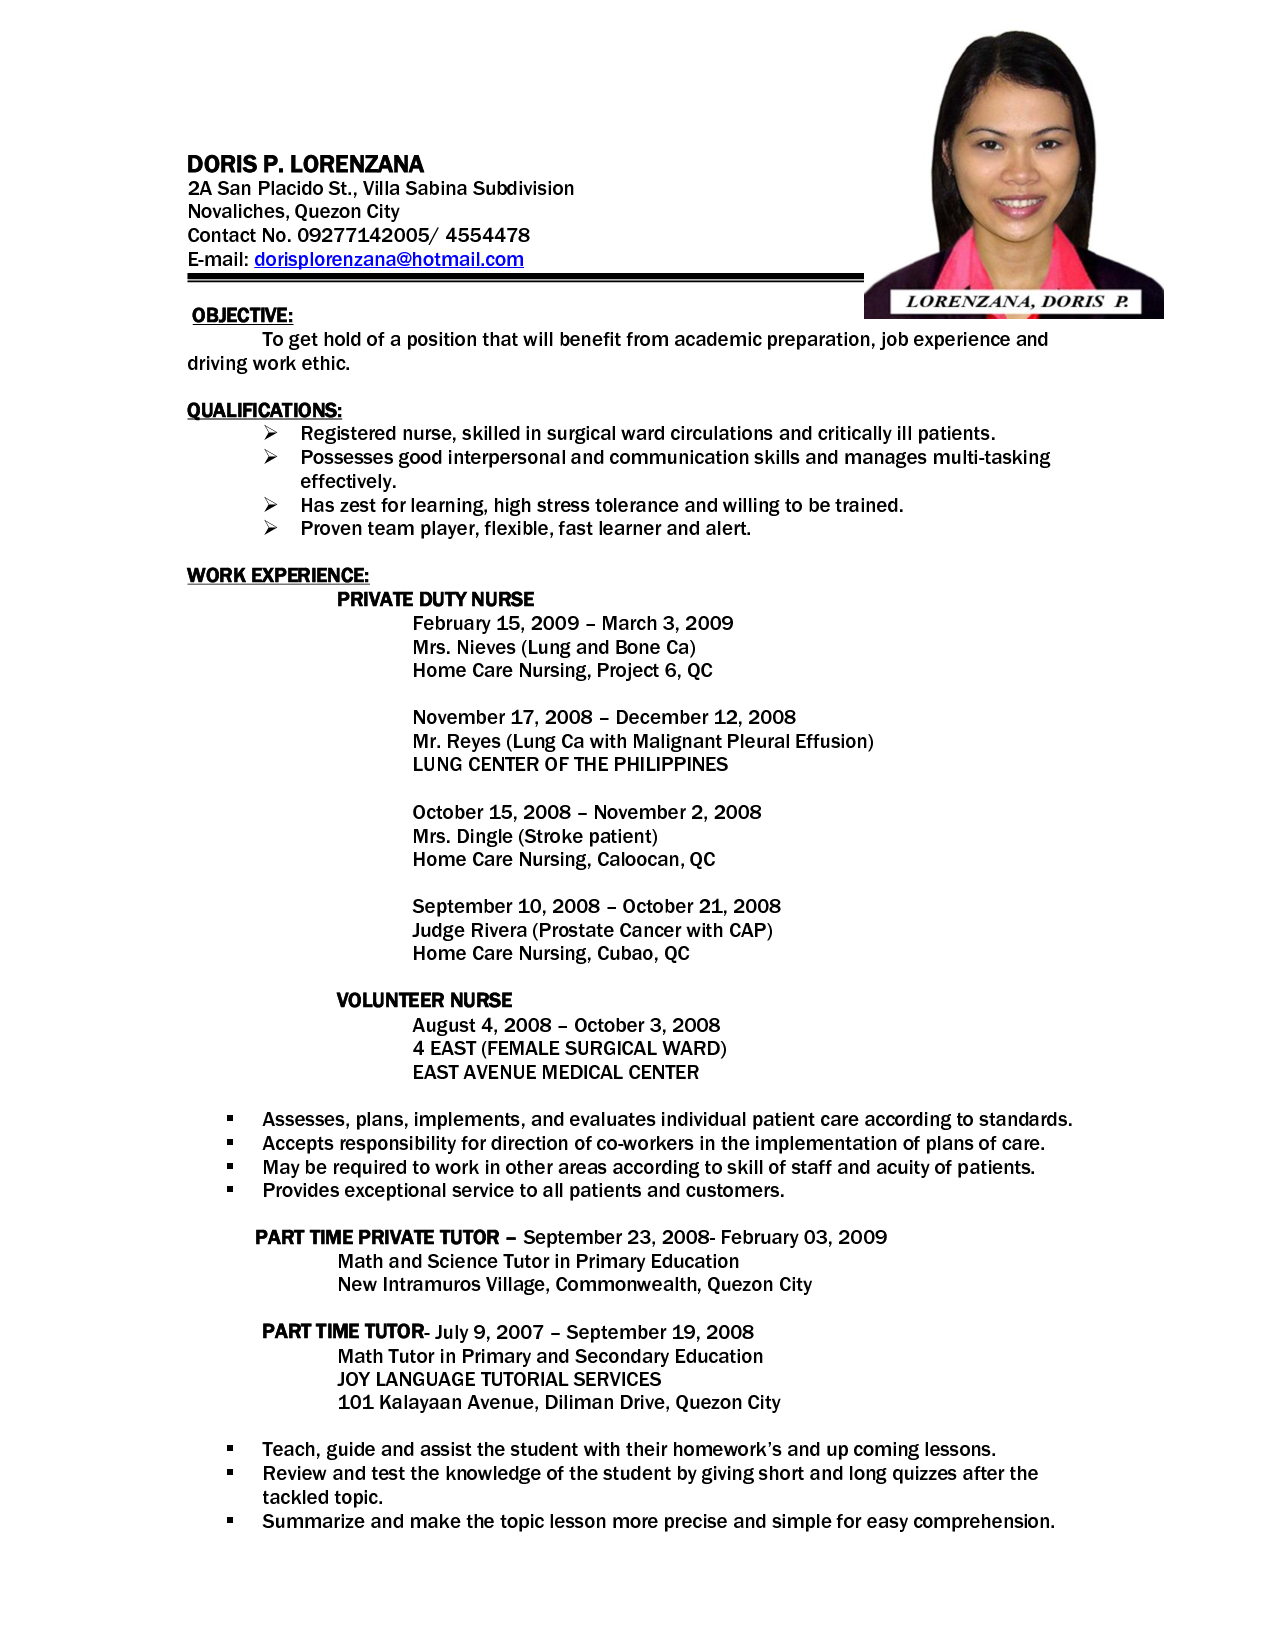 Office Job Resume Format - Resume Sample - Fotolip - Get inspiration for your resume, use one of our professional templates, and score the job you want.